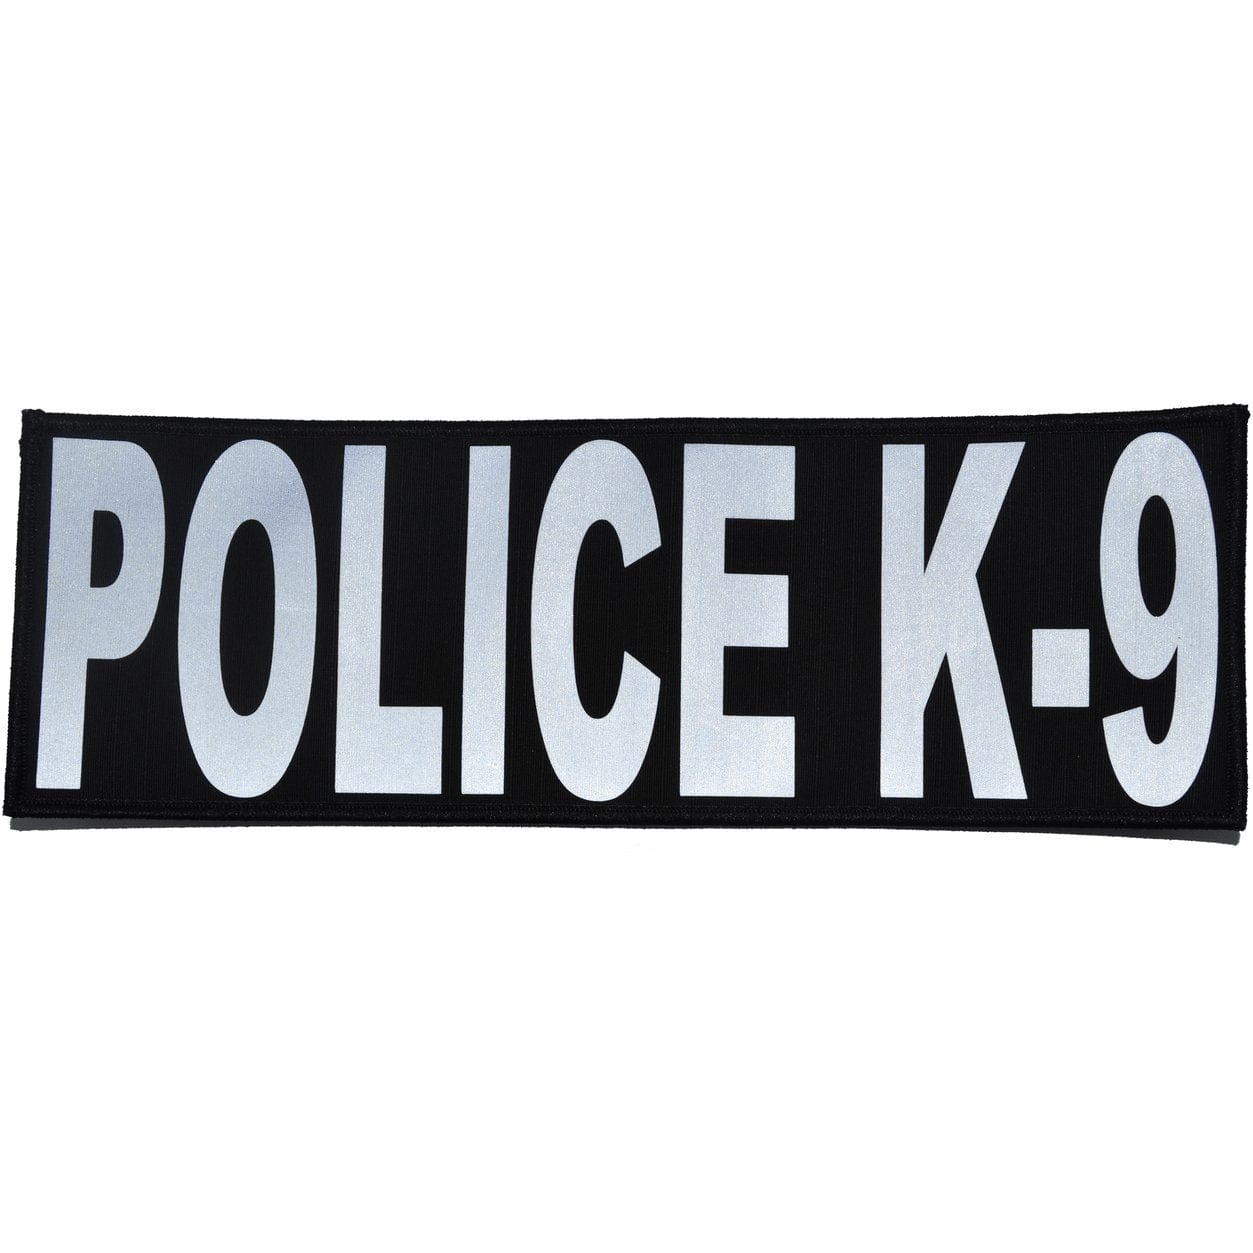 Tactical Gear Junkie Patches Black Police K-9 Reflective - 4x12 Patch